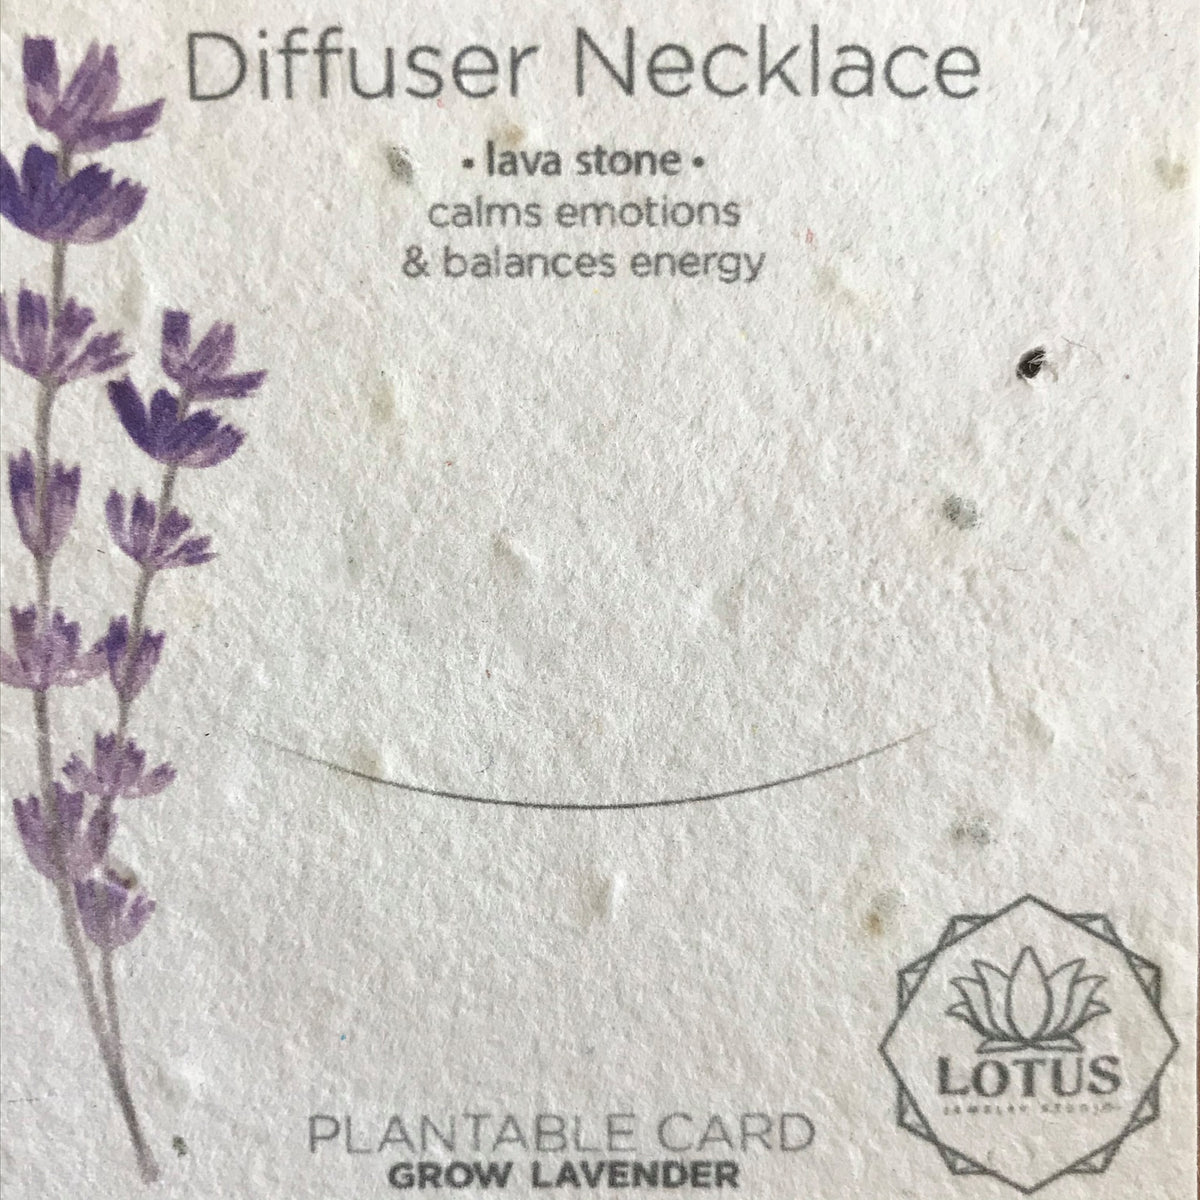 Lava Rock Essential Oil Diffuser Necklace by Lotus Jewelry Studio. Jewelry card printed on plantable lavender seed card.